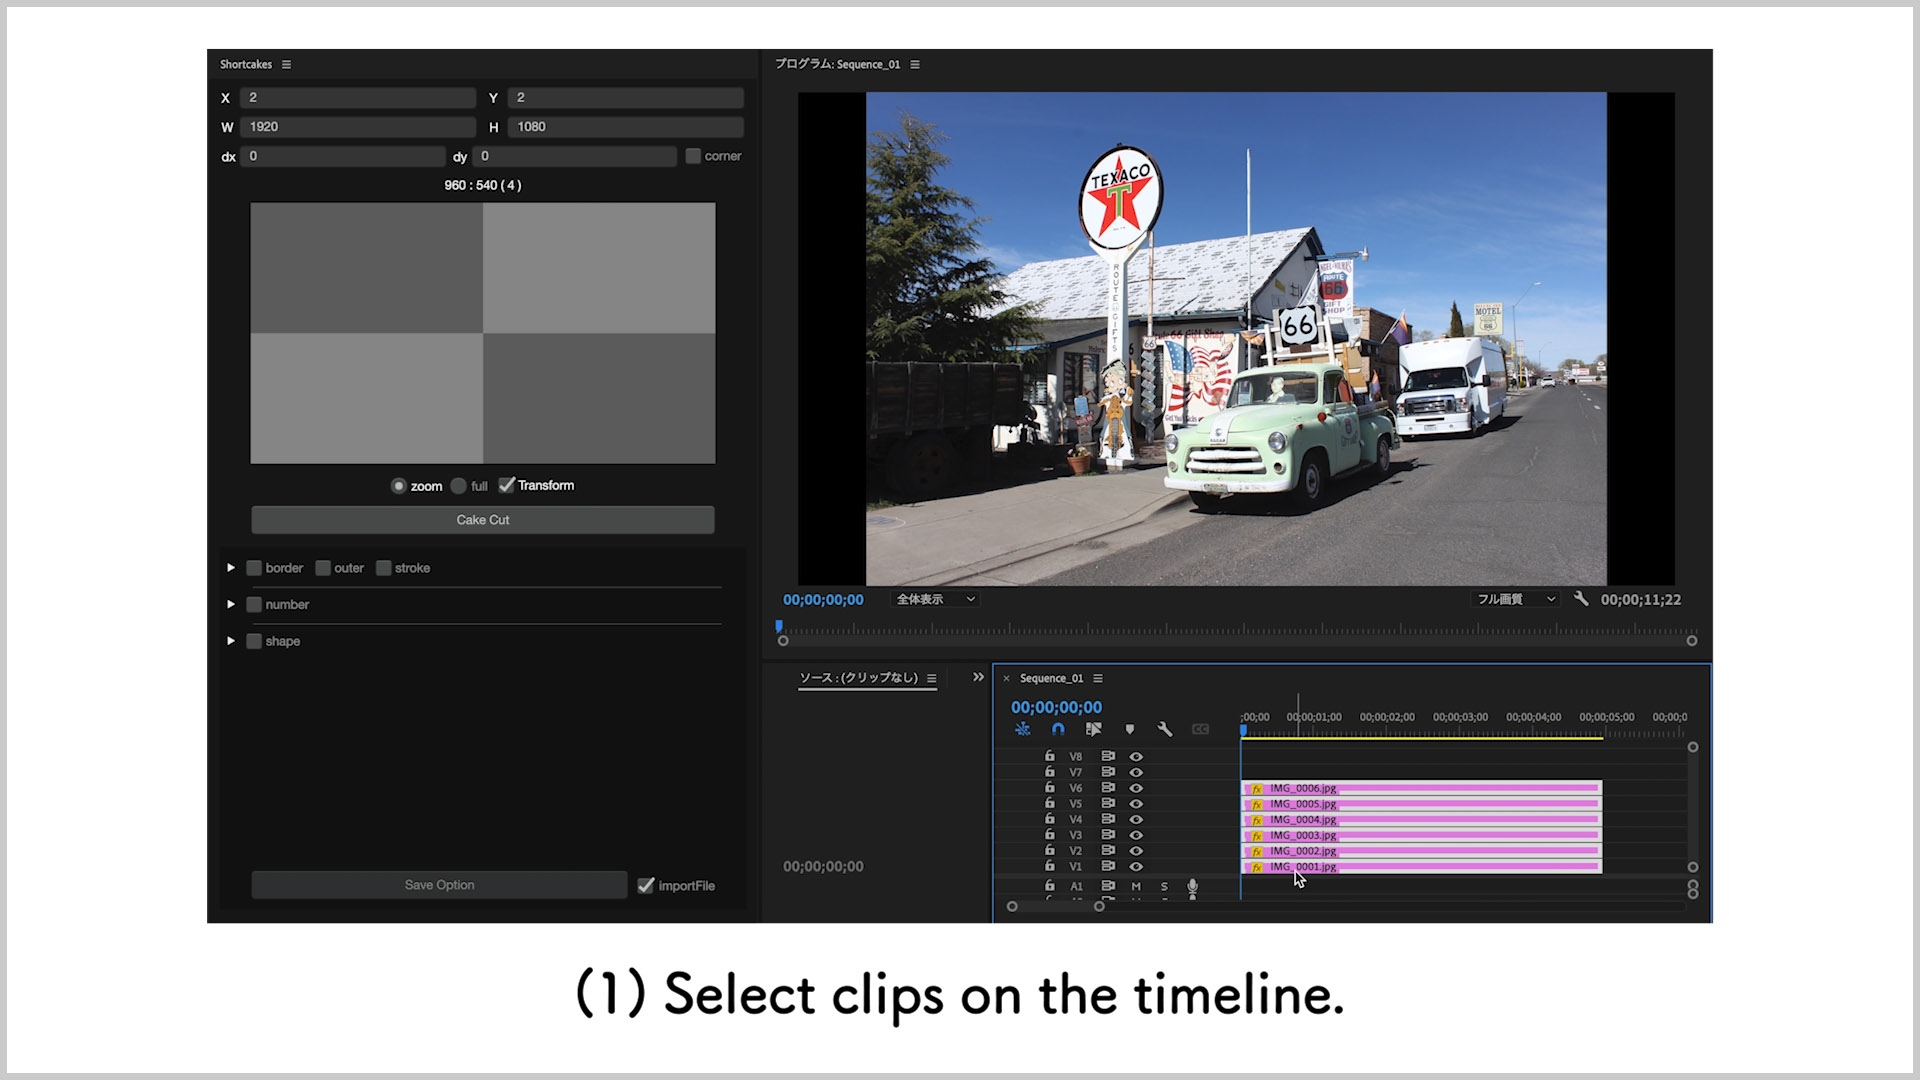 1. Select clips on the timeline.